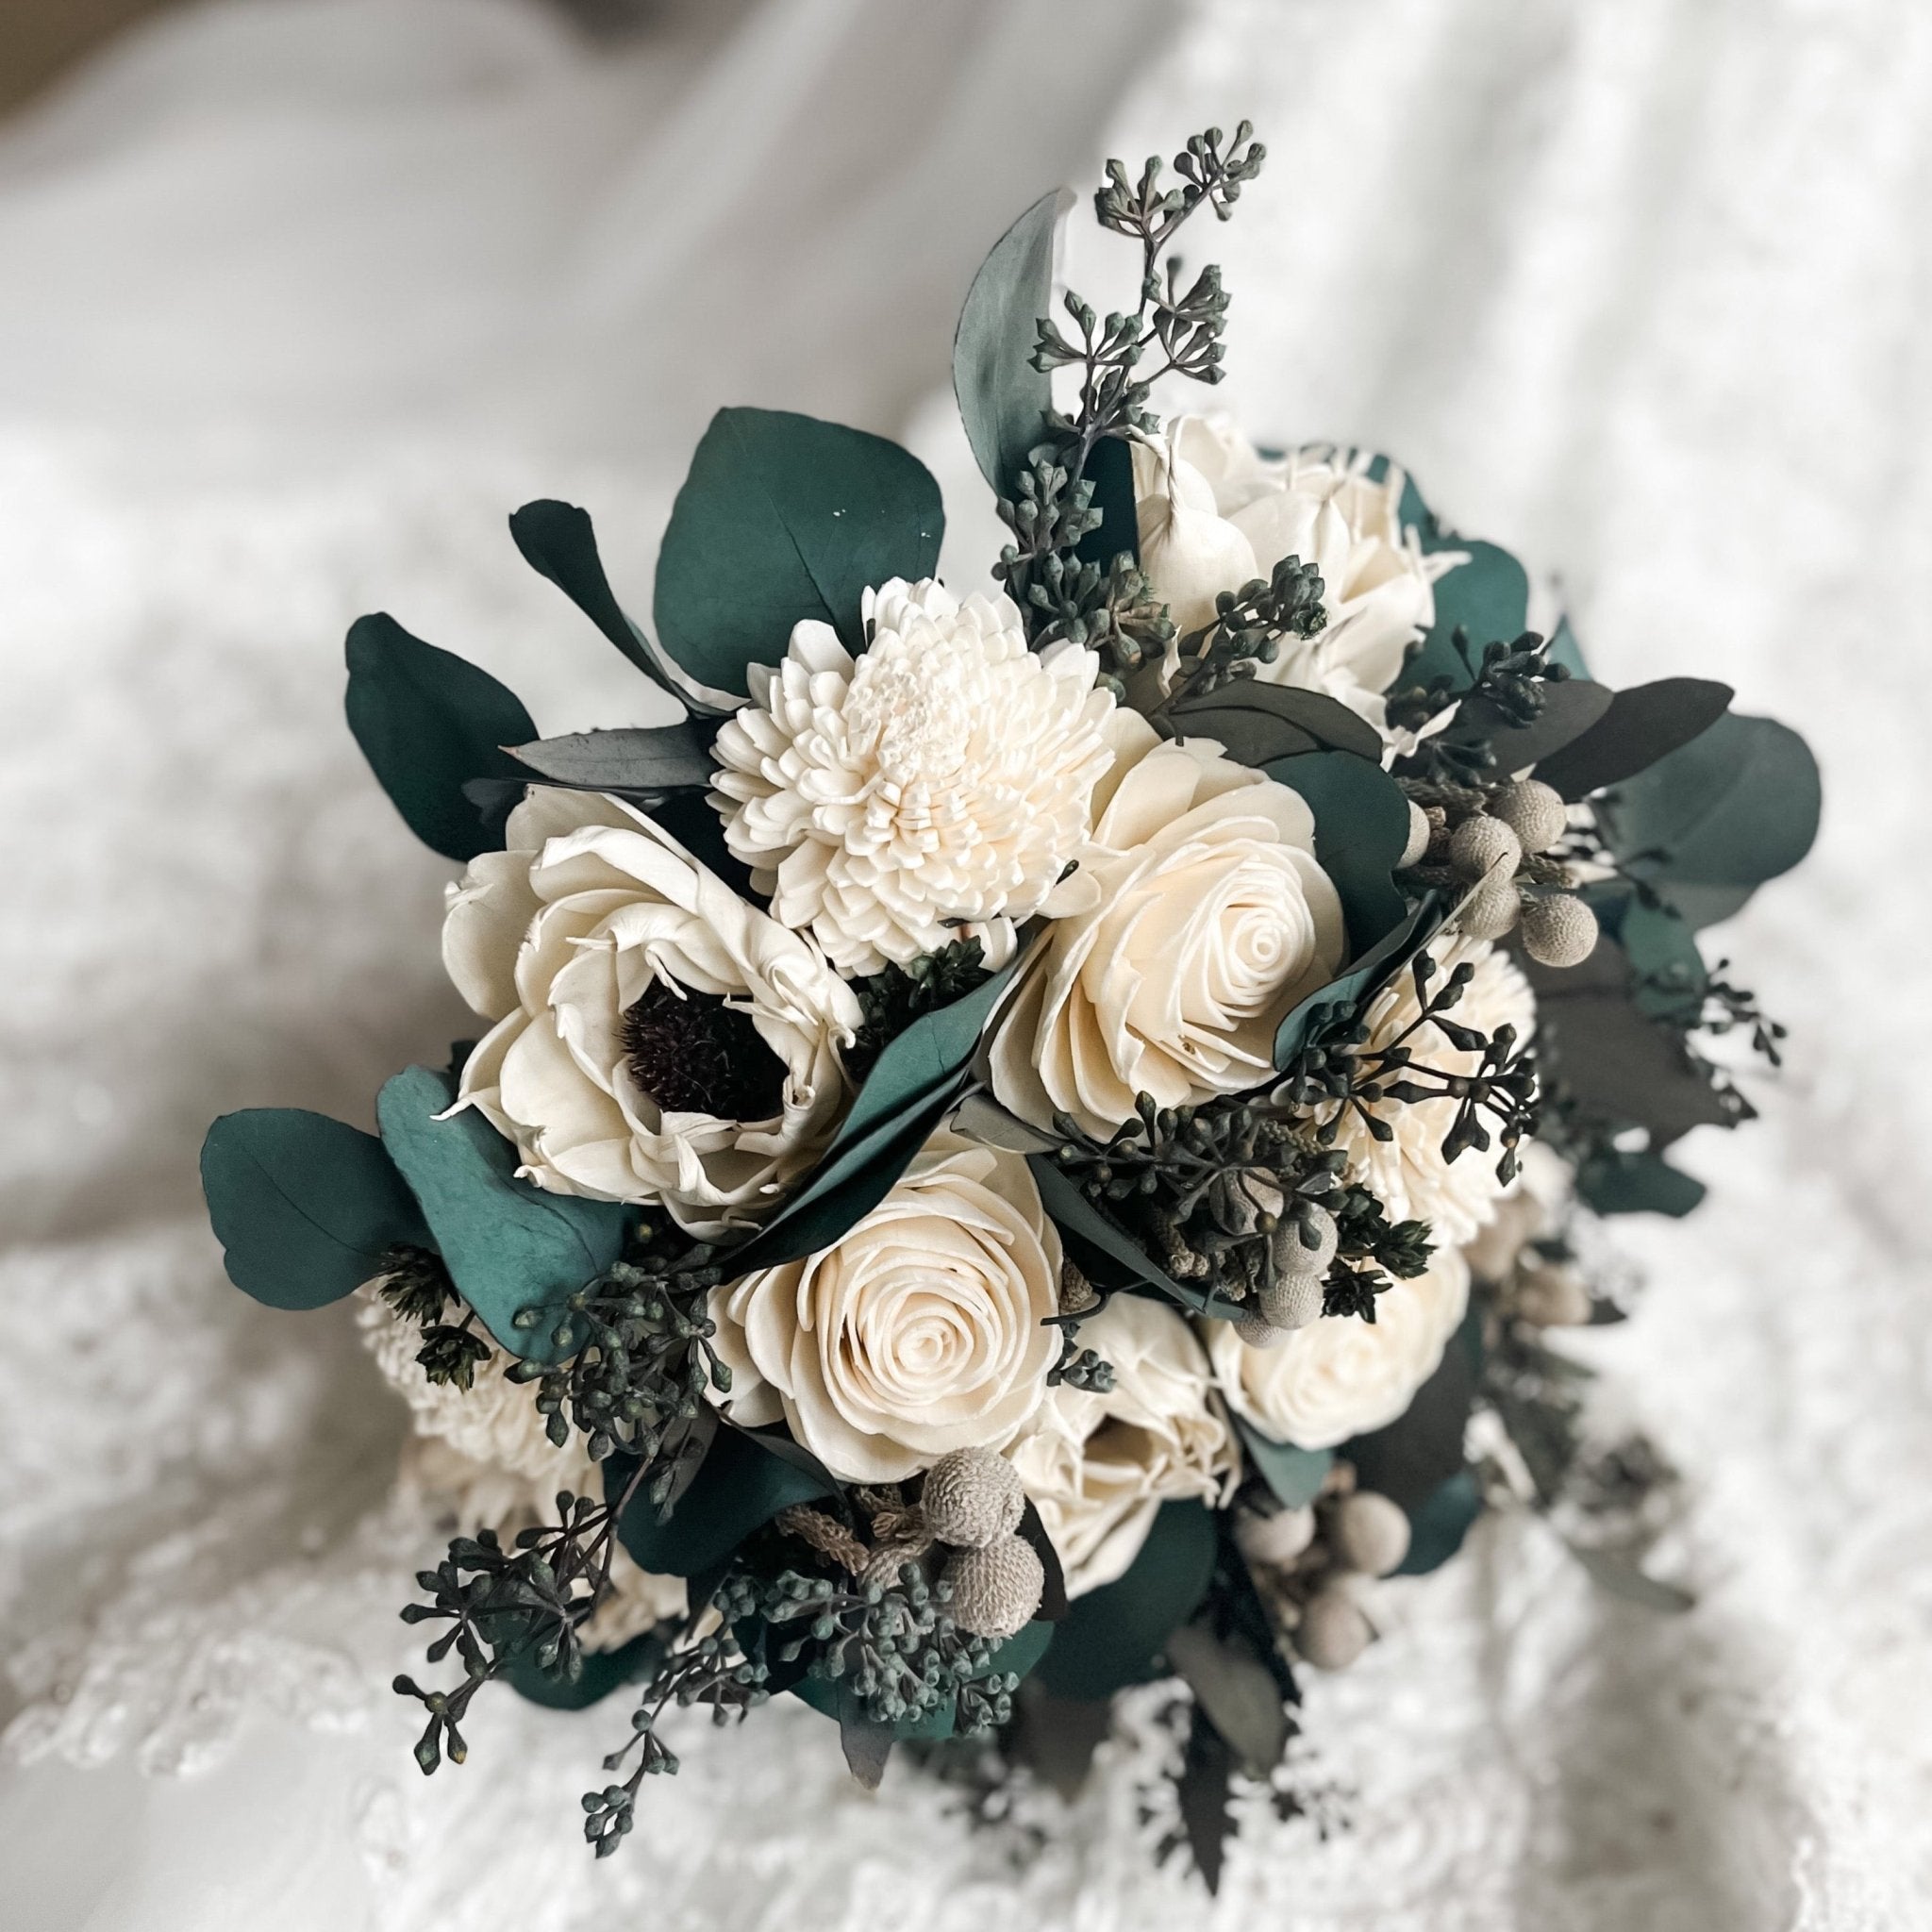 Ivory Serenity: A Beautiful Bouquet of White and Green Flowers - PapiroExtra Large 12" Bride